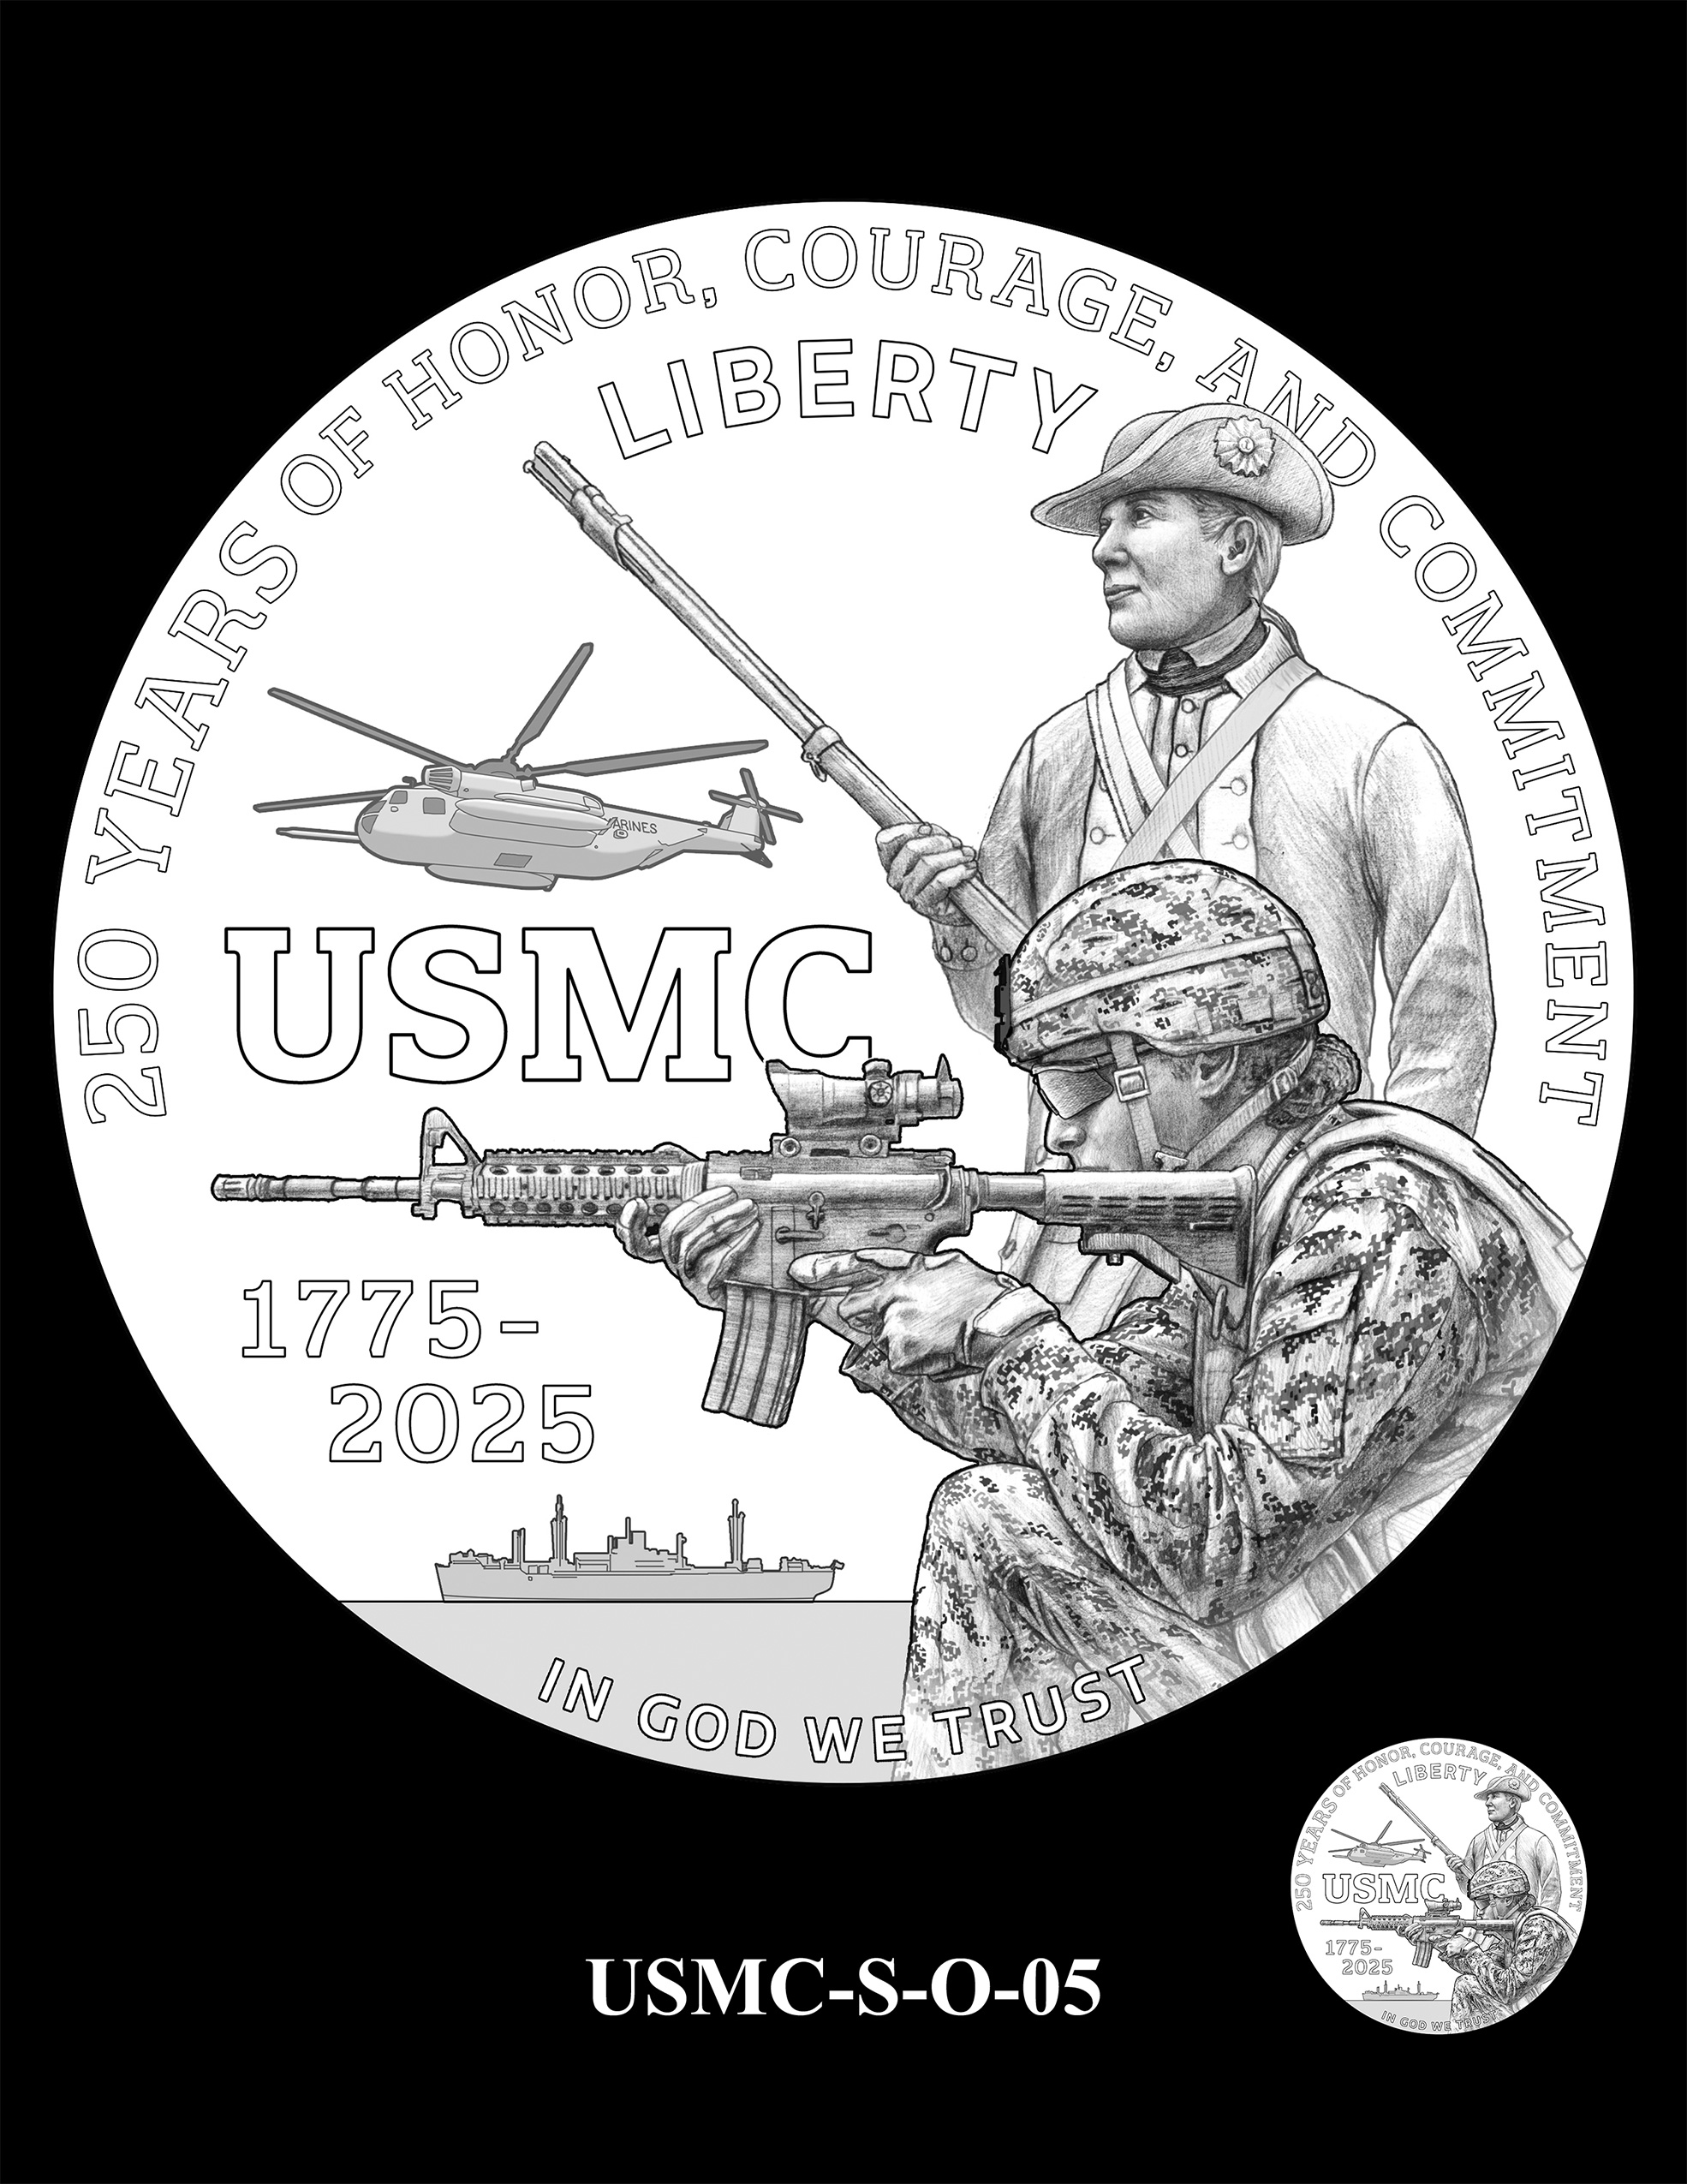 USMC-S-O-05 -- 250th Anniversary of the United States Marine Corps - Silver